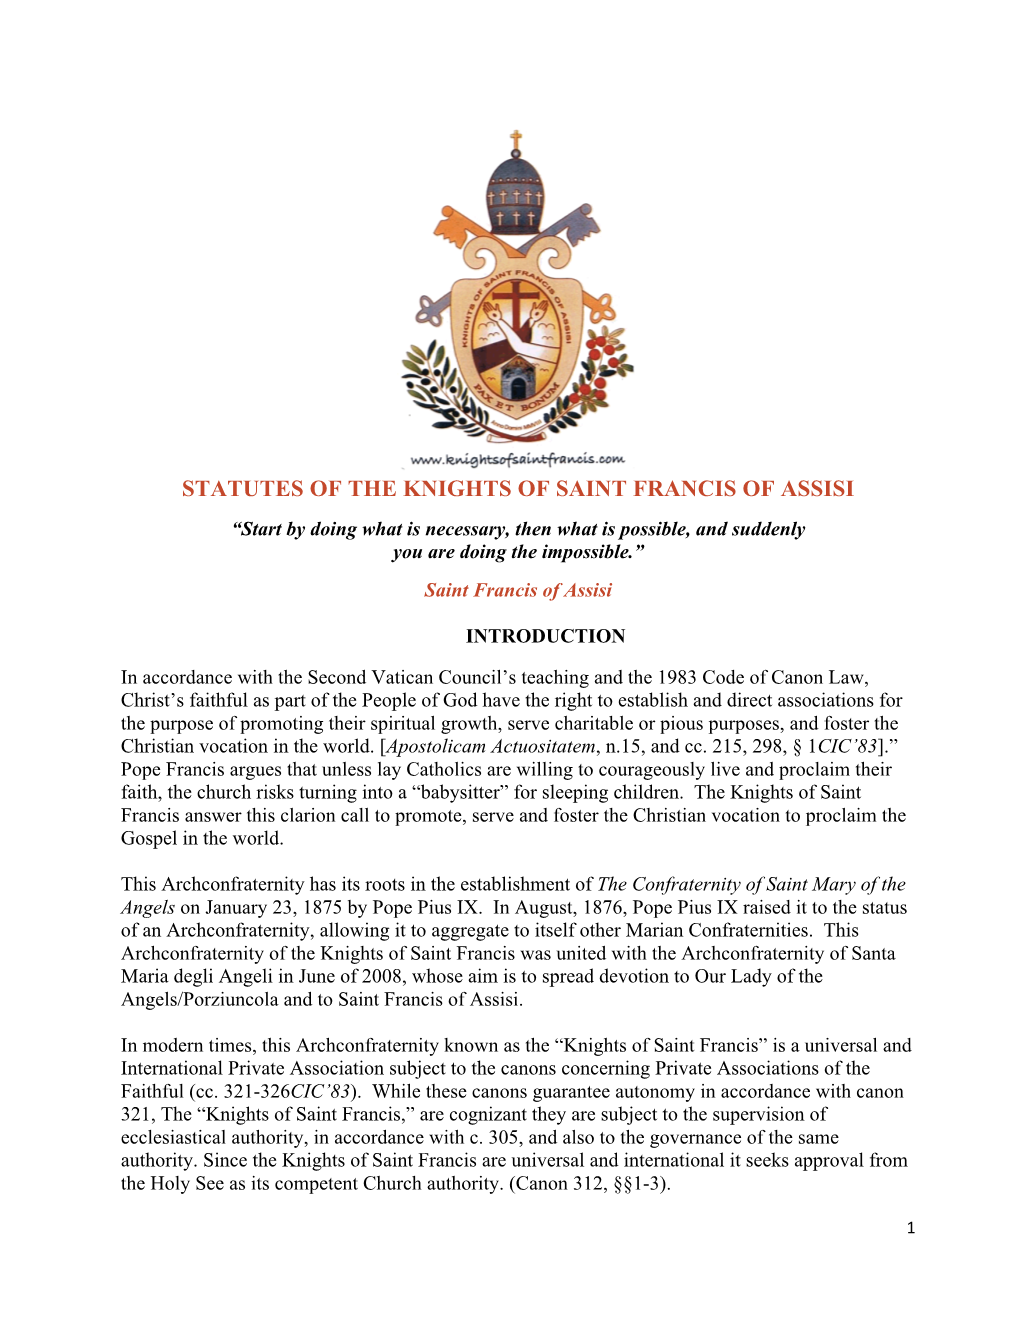 Statutes of the Knights of Saint Francis of Assisi